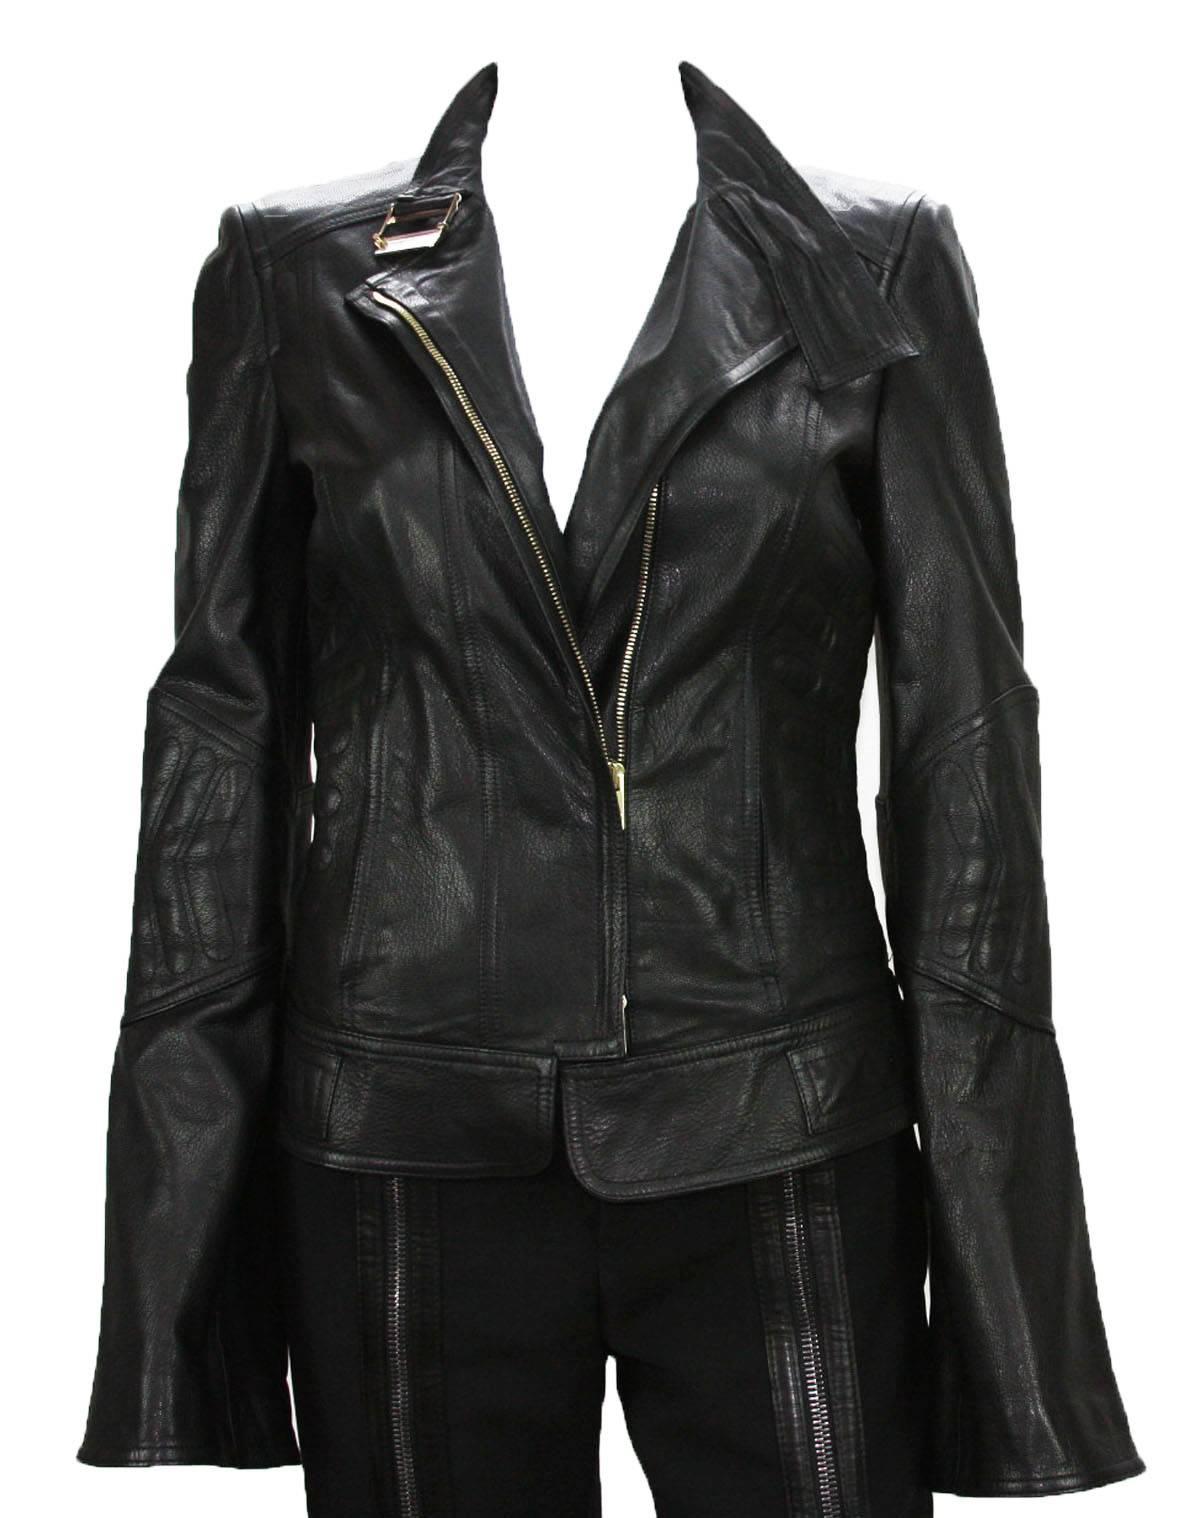 
New TOM FORD for GUCCI Leather Jacket
Italian Size 42 - US 6
F/W 2004 Collection
100% Leather, Black Color, Chevron Pattern, Two Side Zip Pockets, Bell Zip Sleeves, Adjustable Side Straps.
Measurements: Length - 22 inches, Bust - up to 34